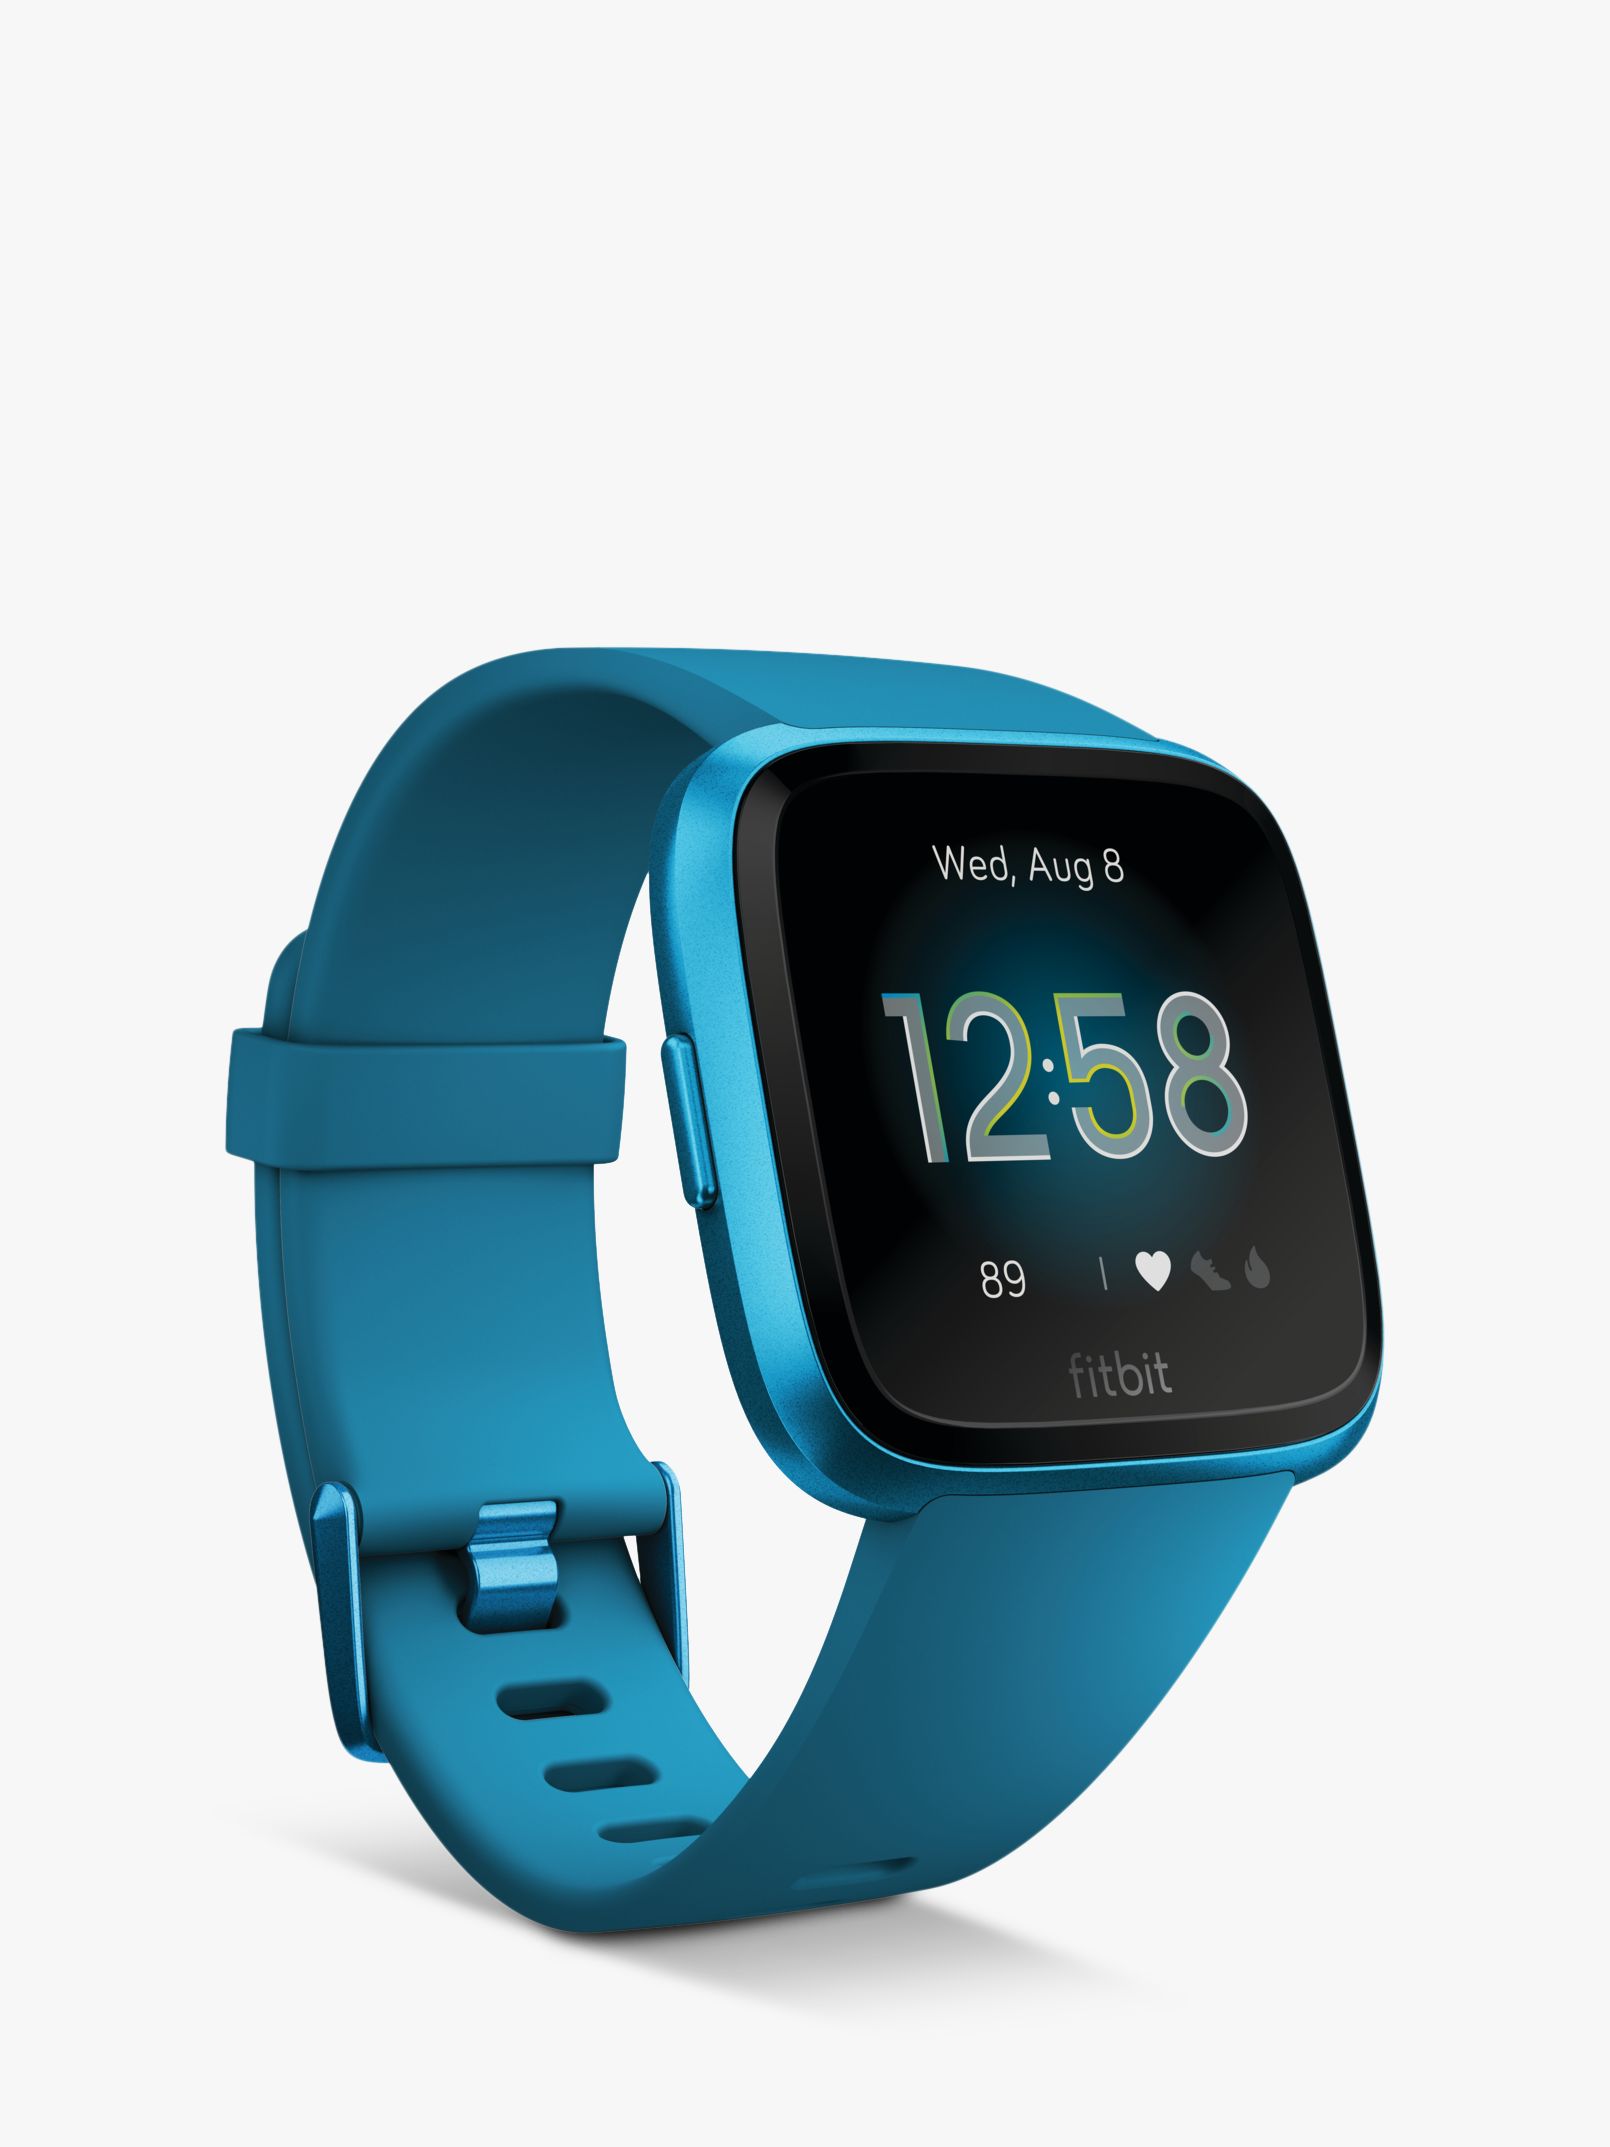 john lewis fitbit watches